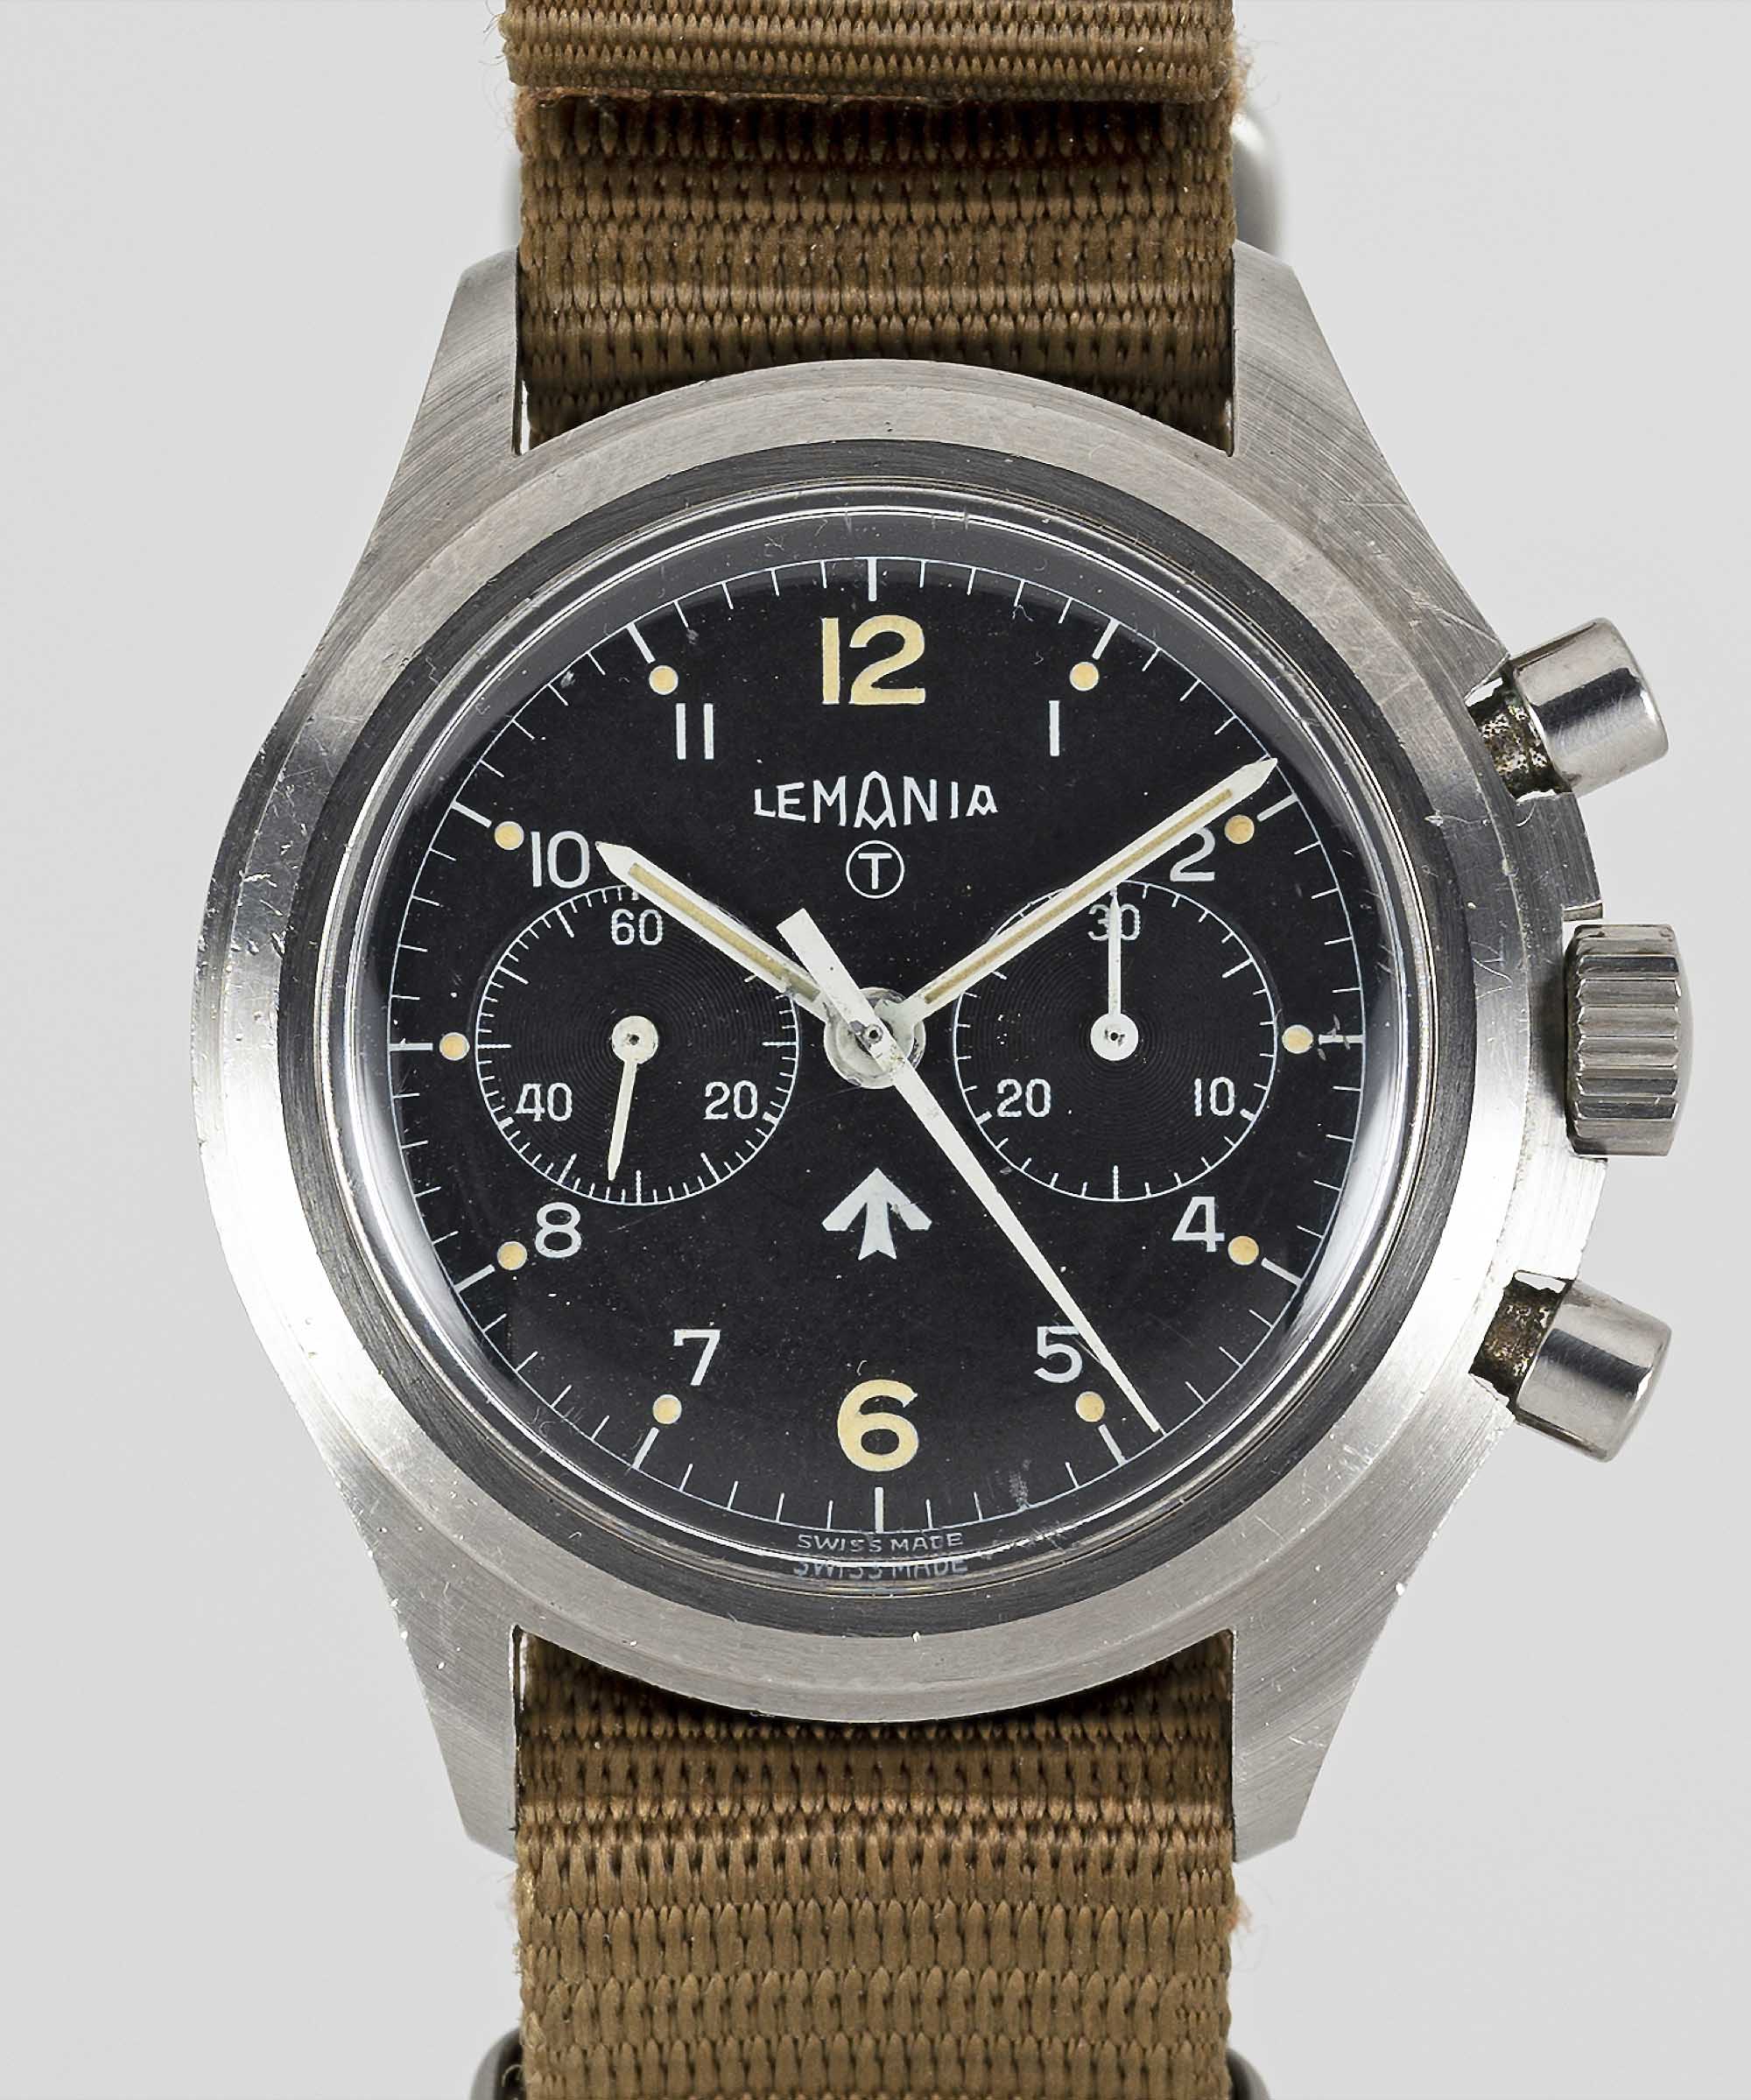 A RARE GENTLEMAN'S STAINLESS STEEL BRITISH MILITARY ROYAL NAVY LEMANIA "DOUBLE BUTTON" CHRONOGRAPH - Image 4 of 11